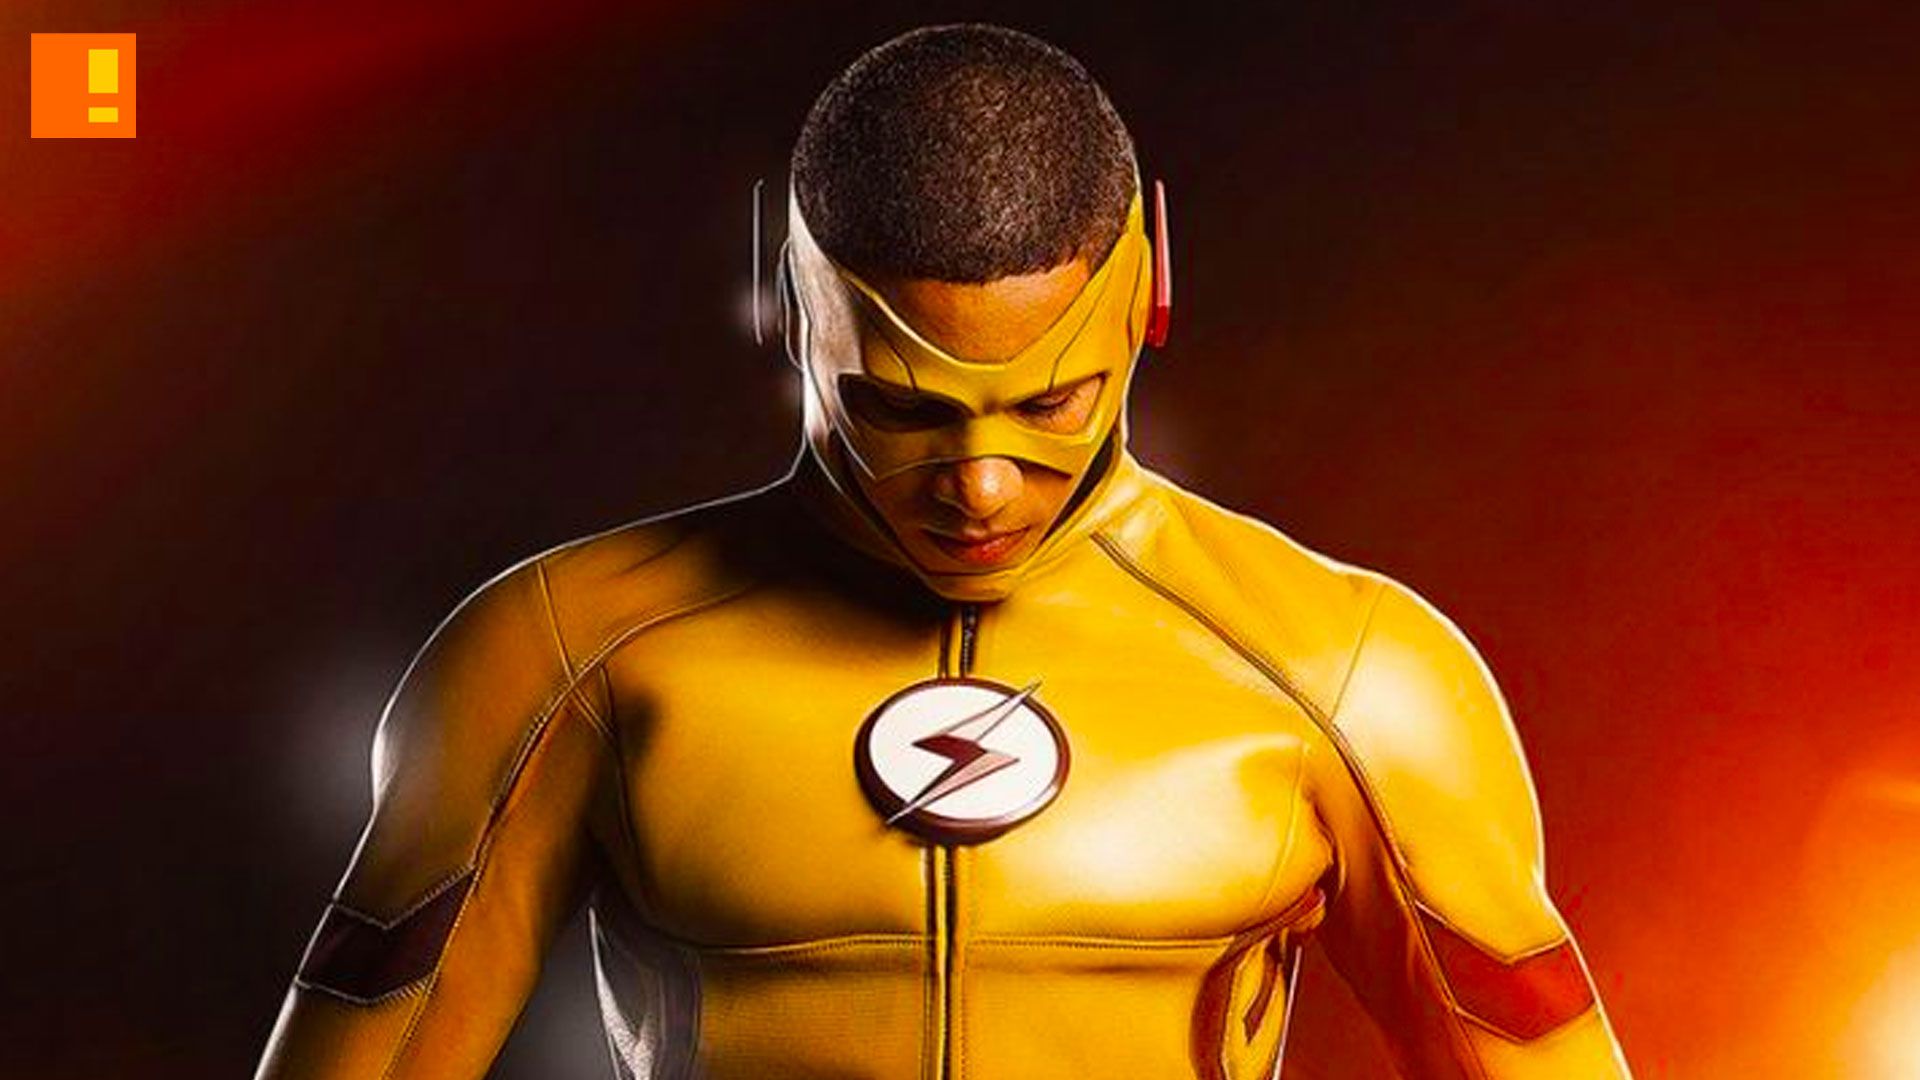 First look at Kid Flash in costume for CW's “The Flash” Season 3